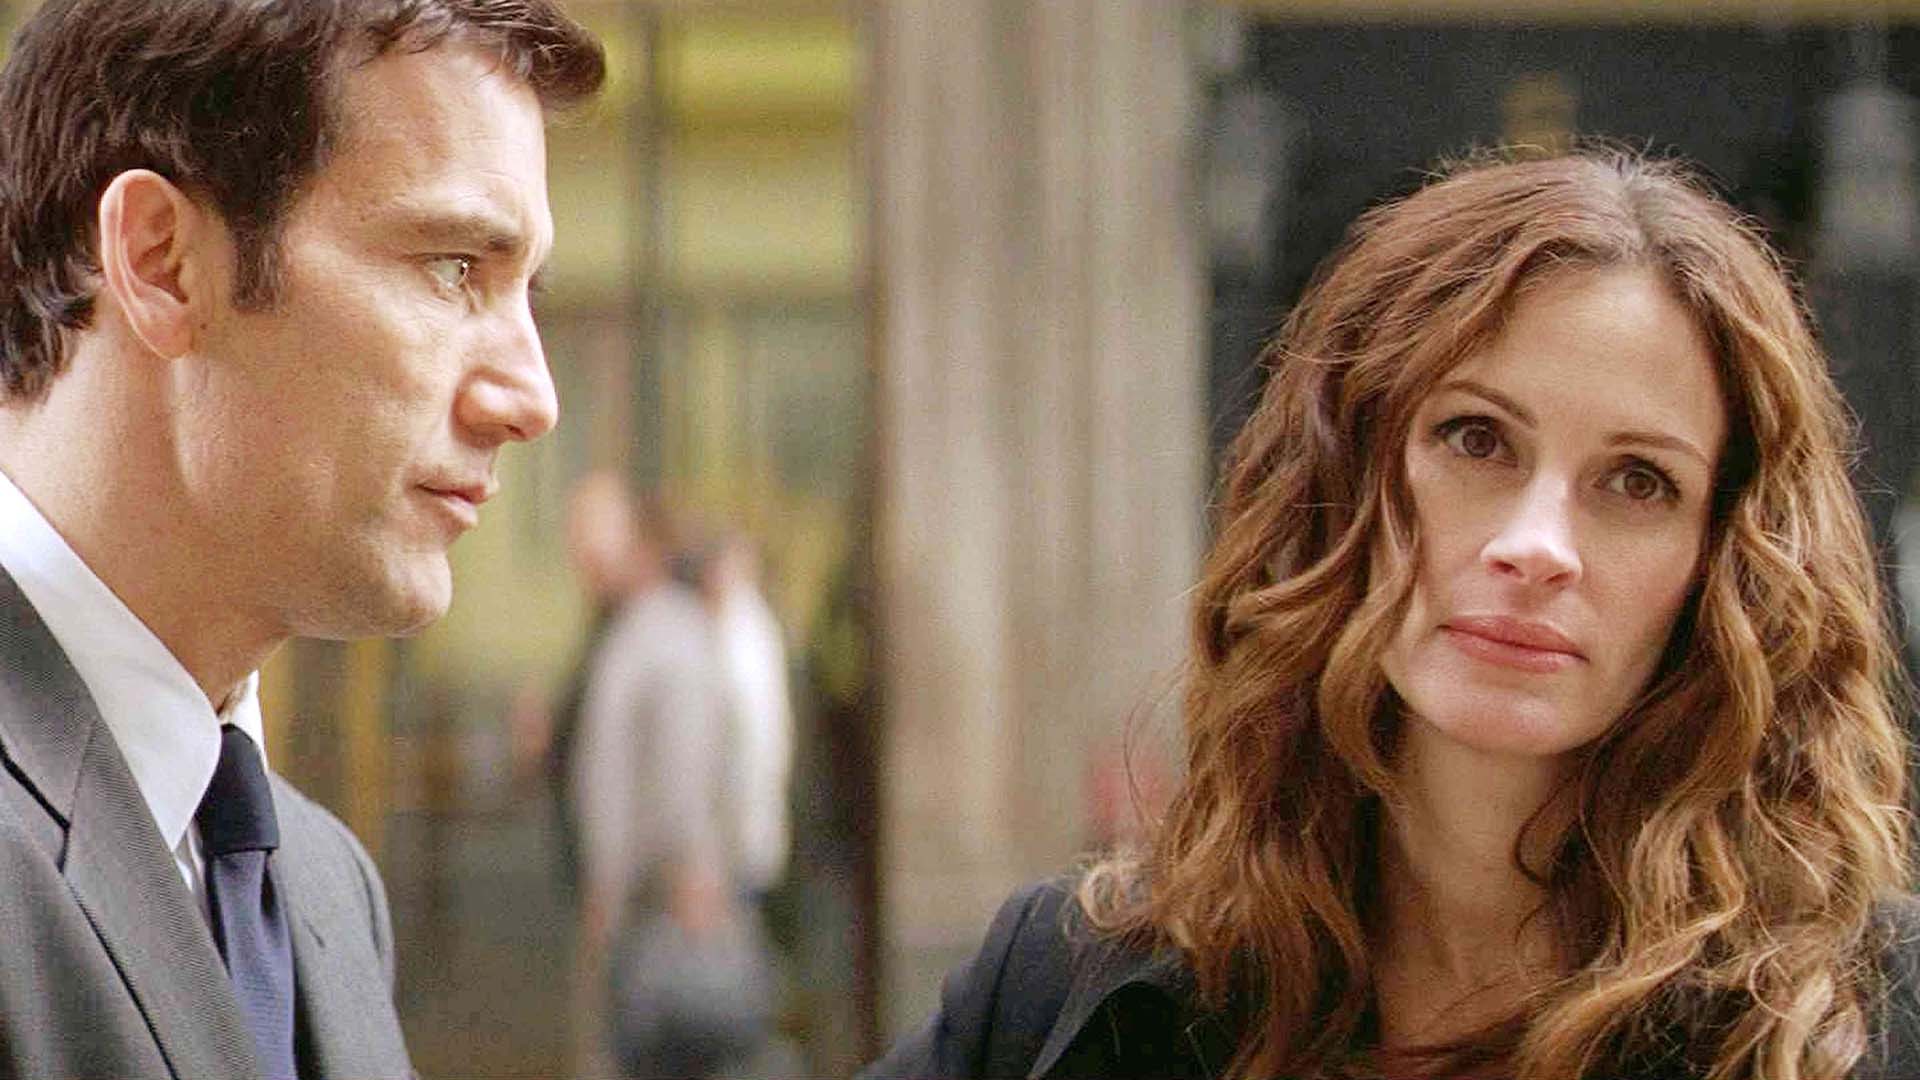 Clive Owen looks at Julia Roberts in Duplicity